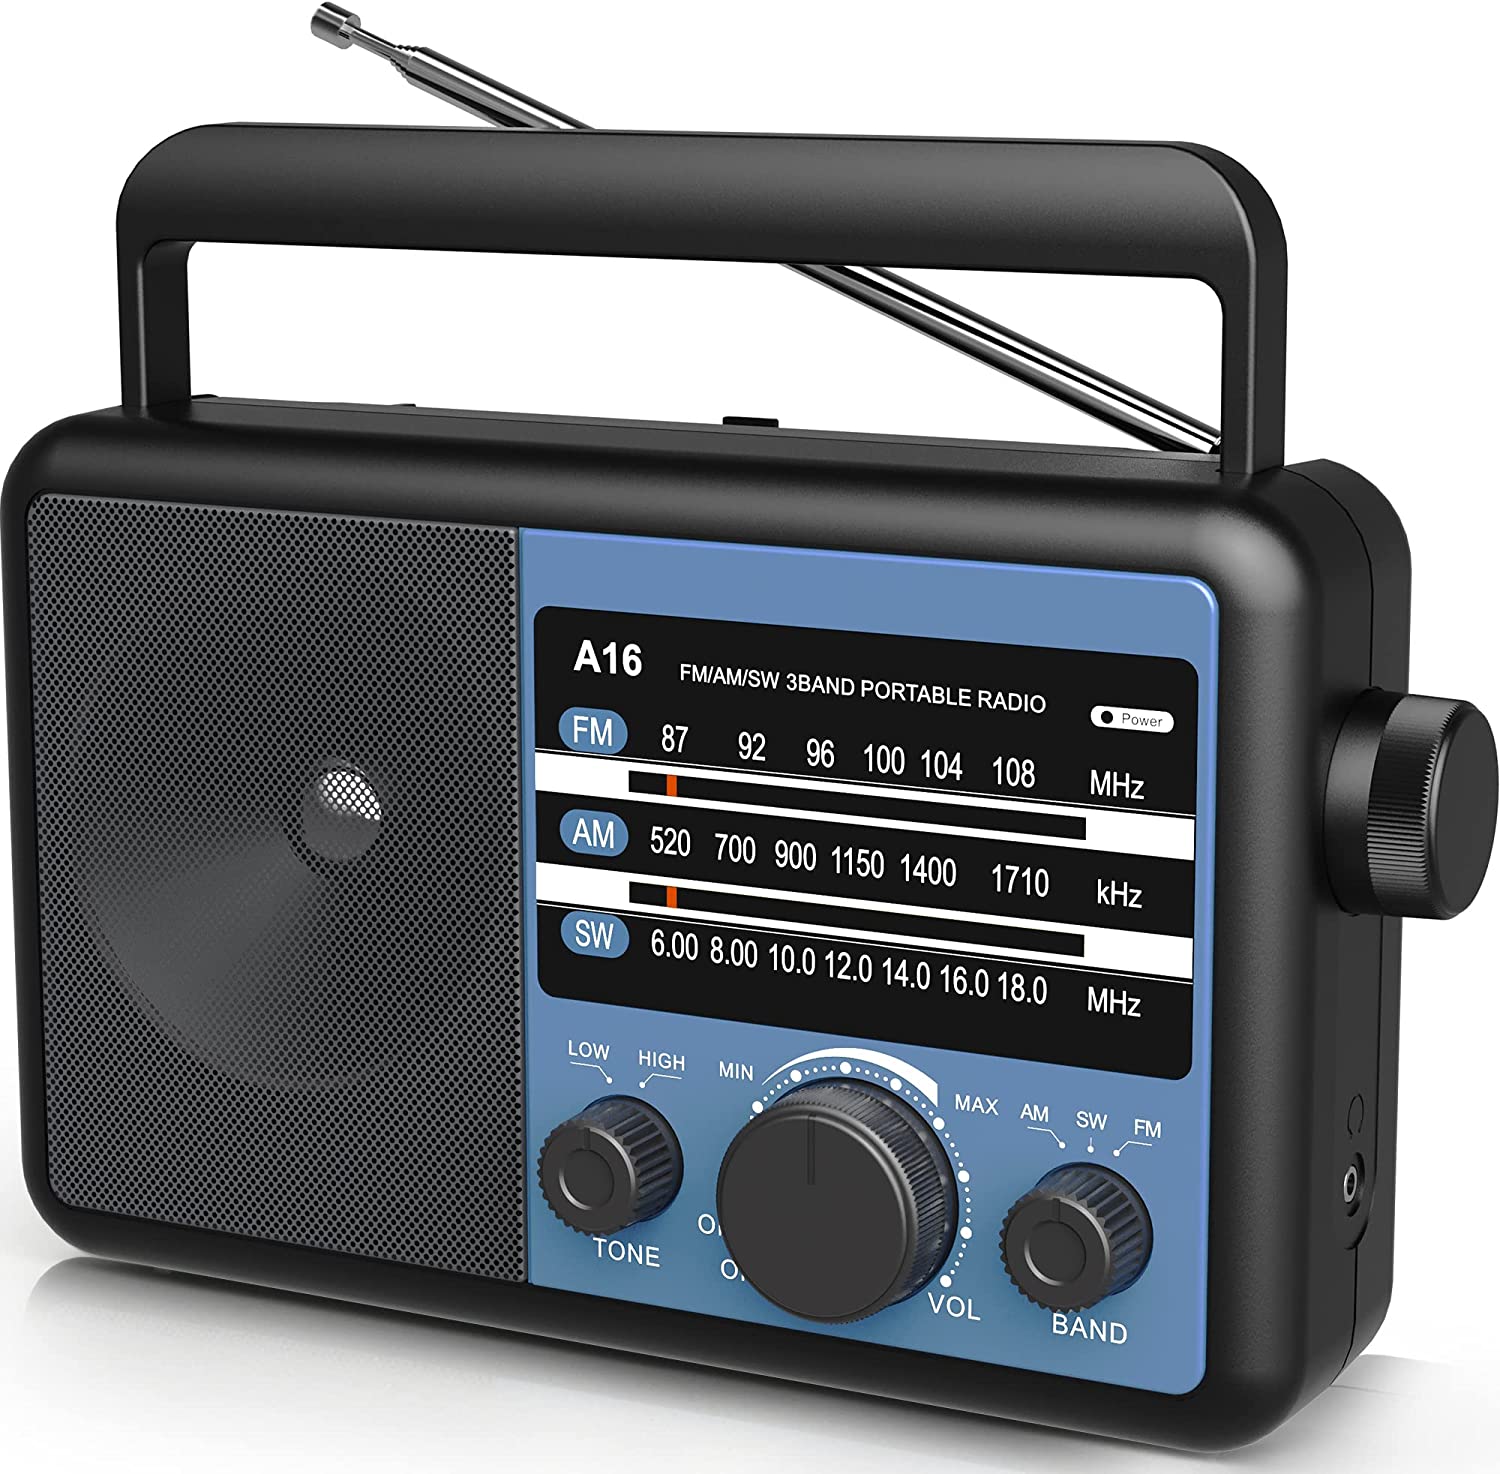 Portable AM FM SW Radio: Battery Operated Radio by 4 D Cell Batteries Or AC Power Shortwave Radio with Excellent Reception,Big Speaker, Standard Earphone Jack, High/Low Tone Mode, Large Knob